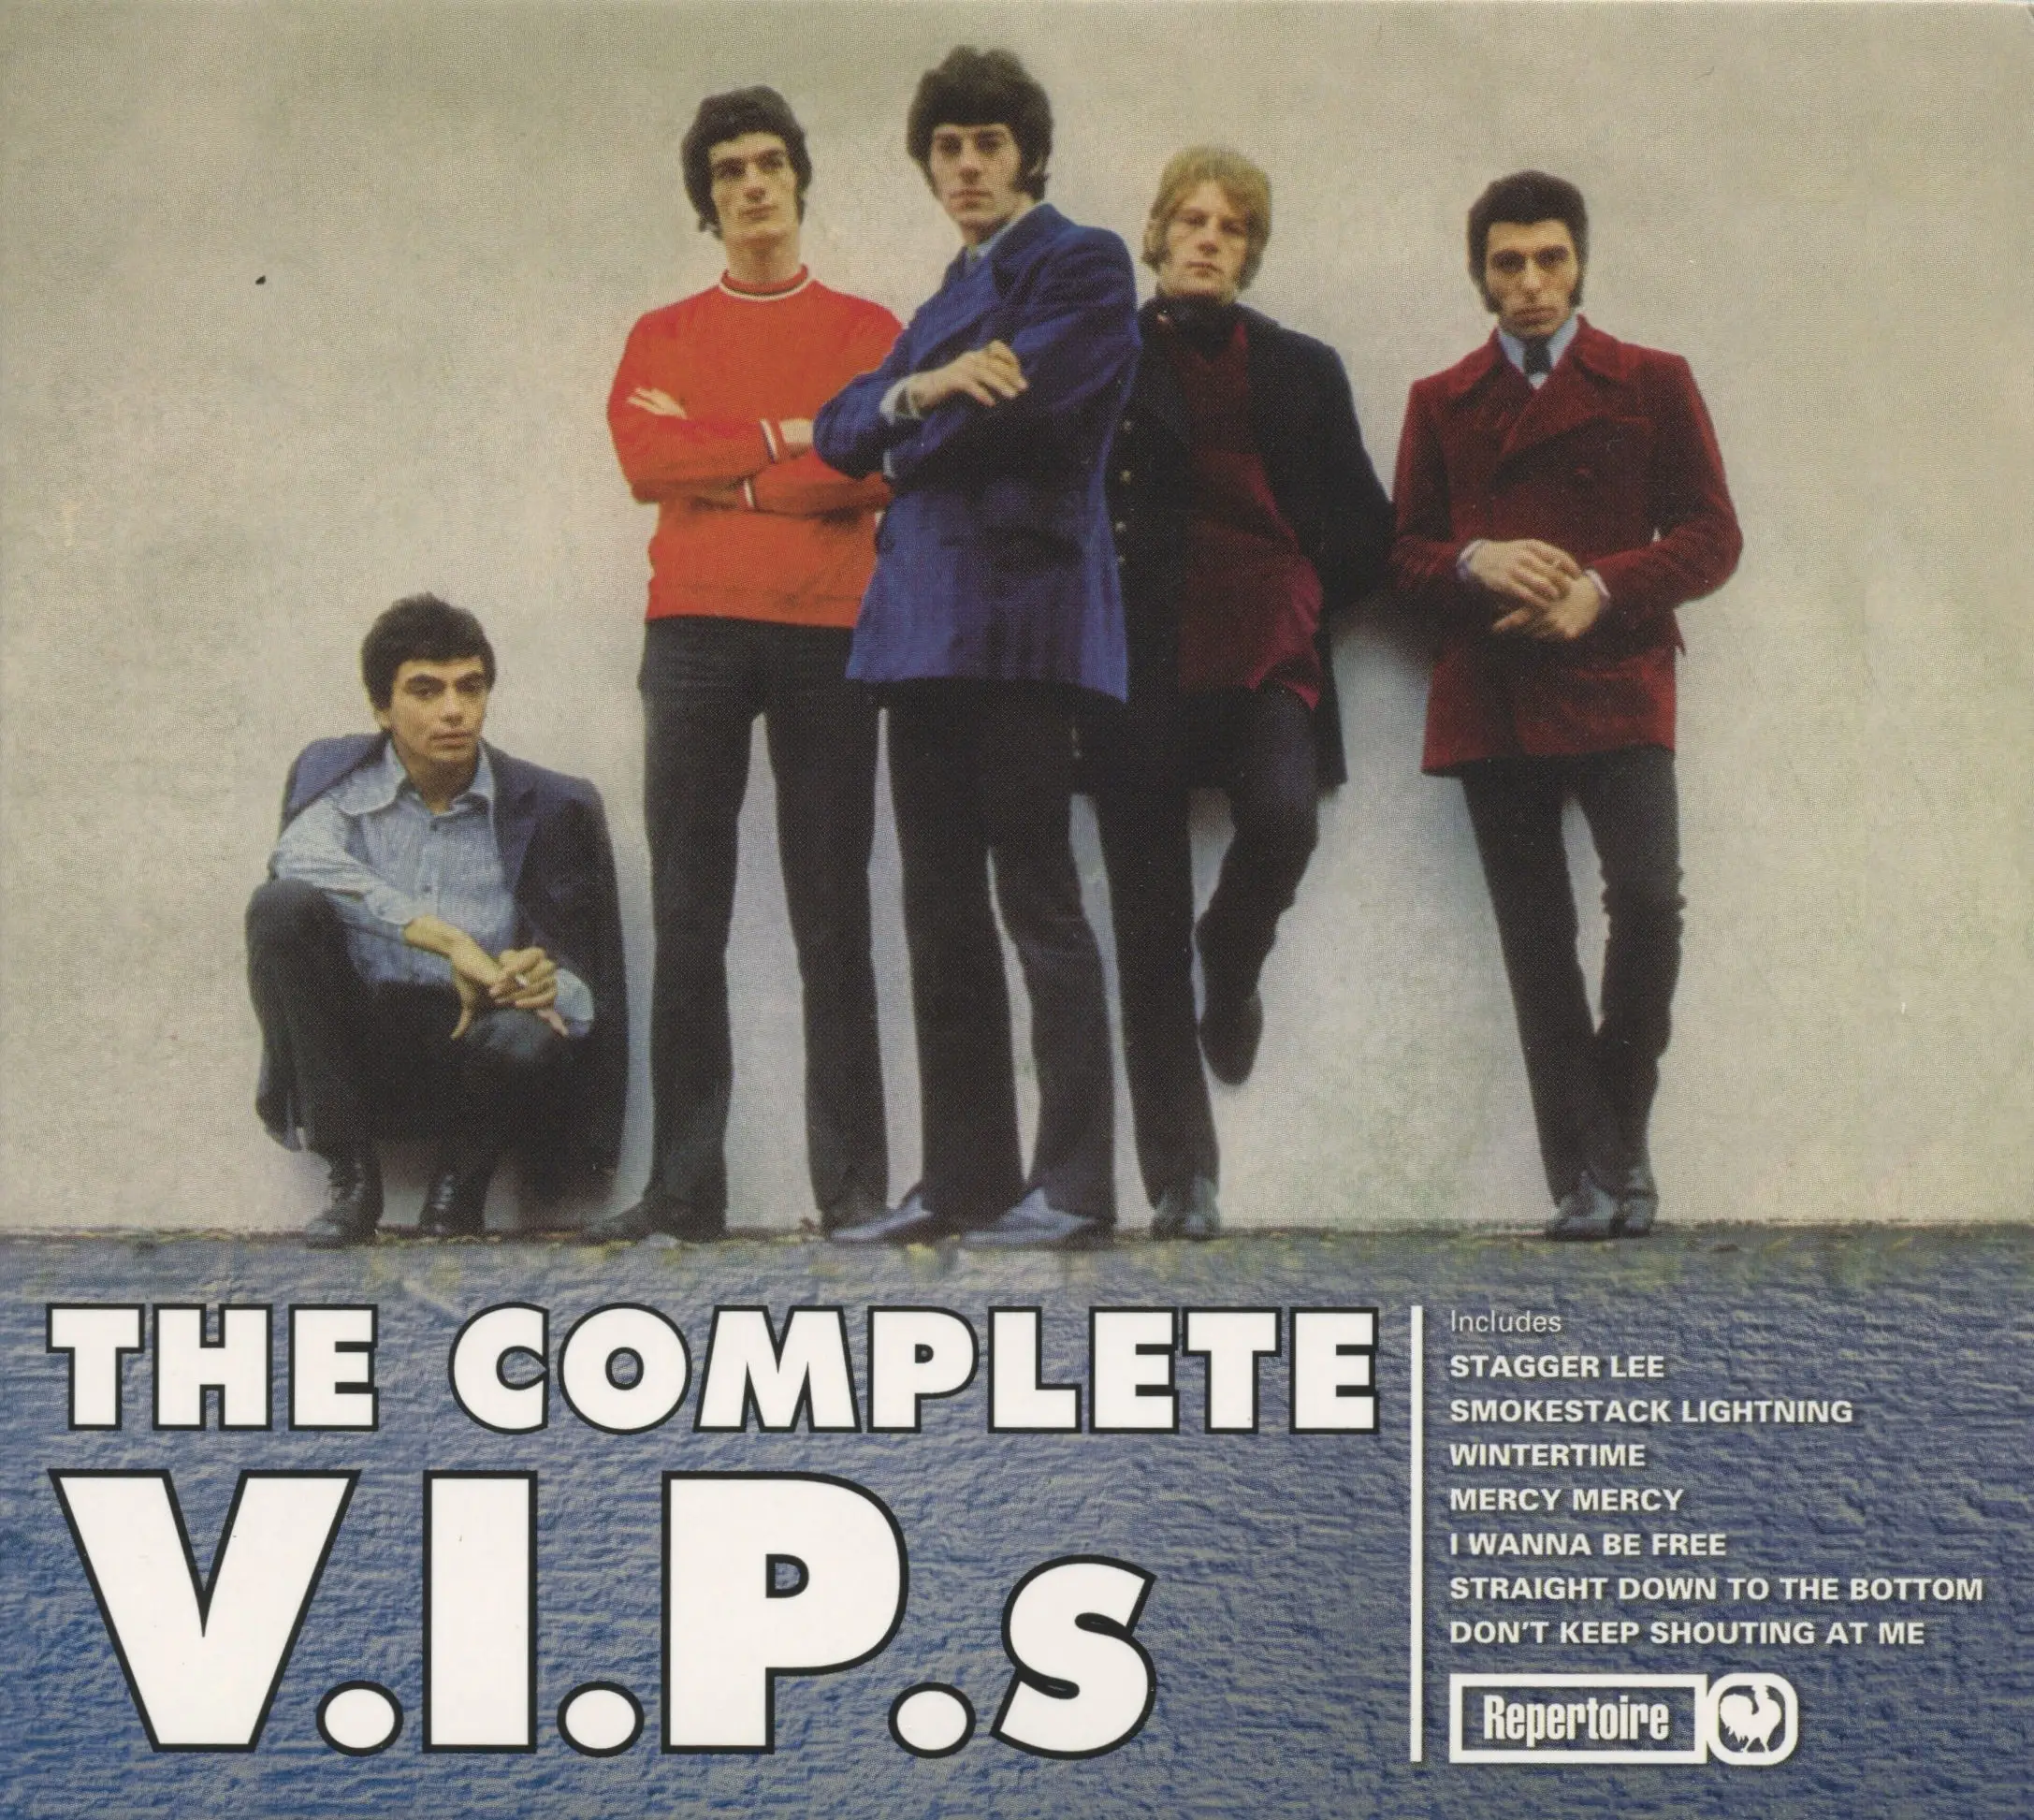 Straight down. The v.i.p.'s-the complete (Disc 1). The v.i.p.'s-the complete (Disc 2). The v.i.p.'s-the complete (Disc 1) Vinyl.